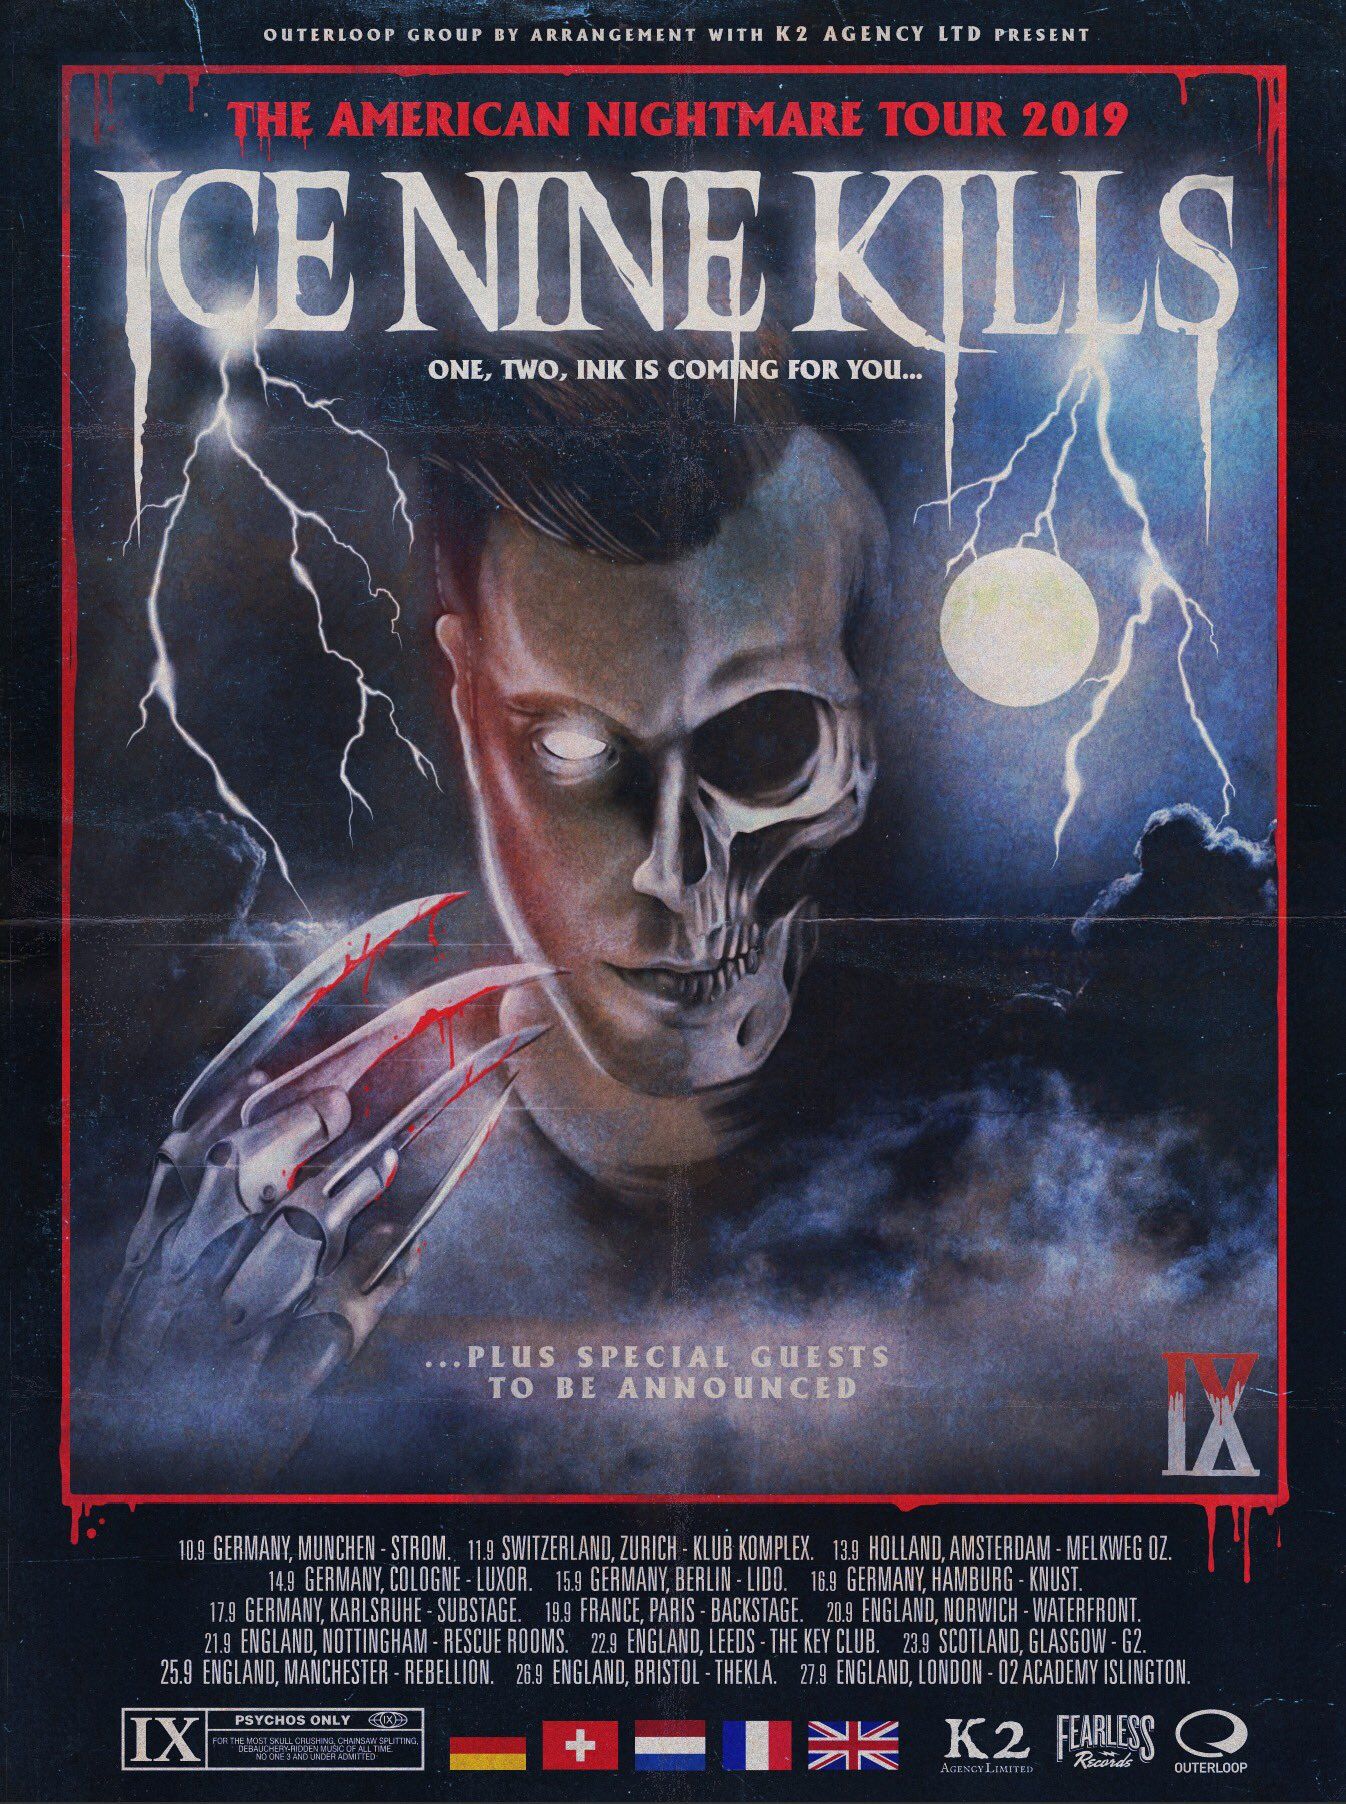 Ice Nine Kills Have Announced A Massive Tour Of Europe + The UK